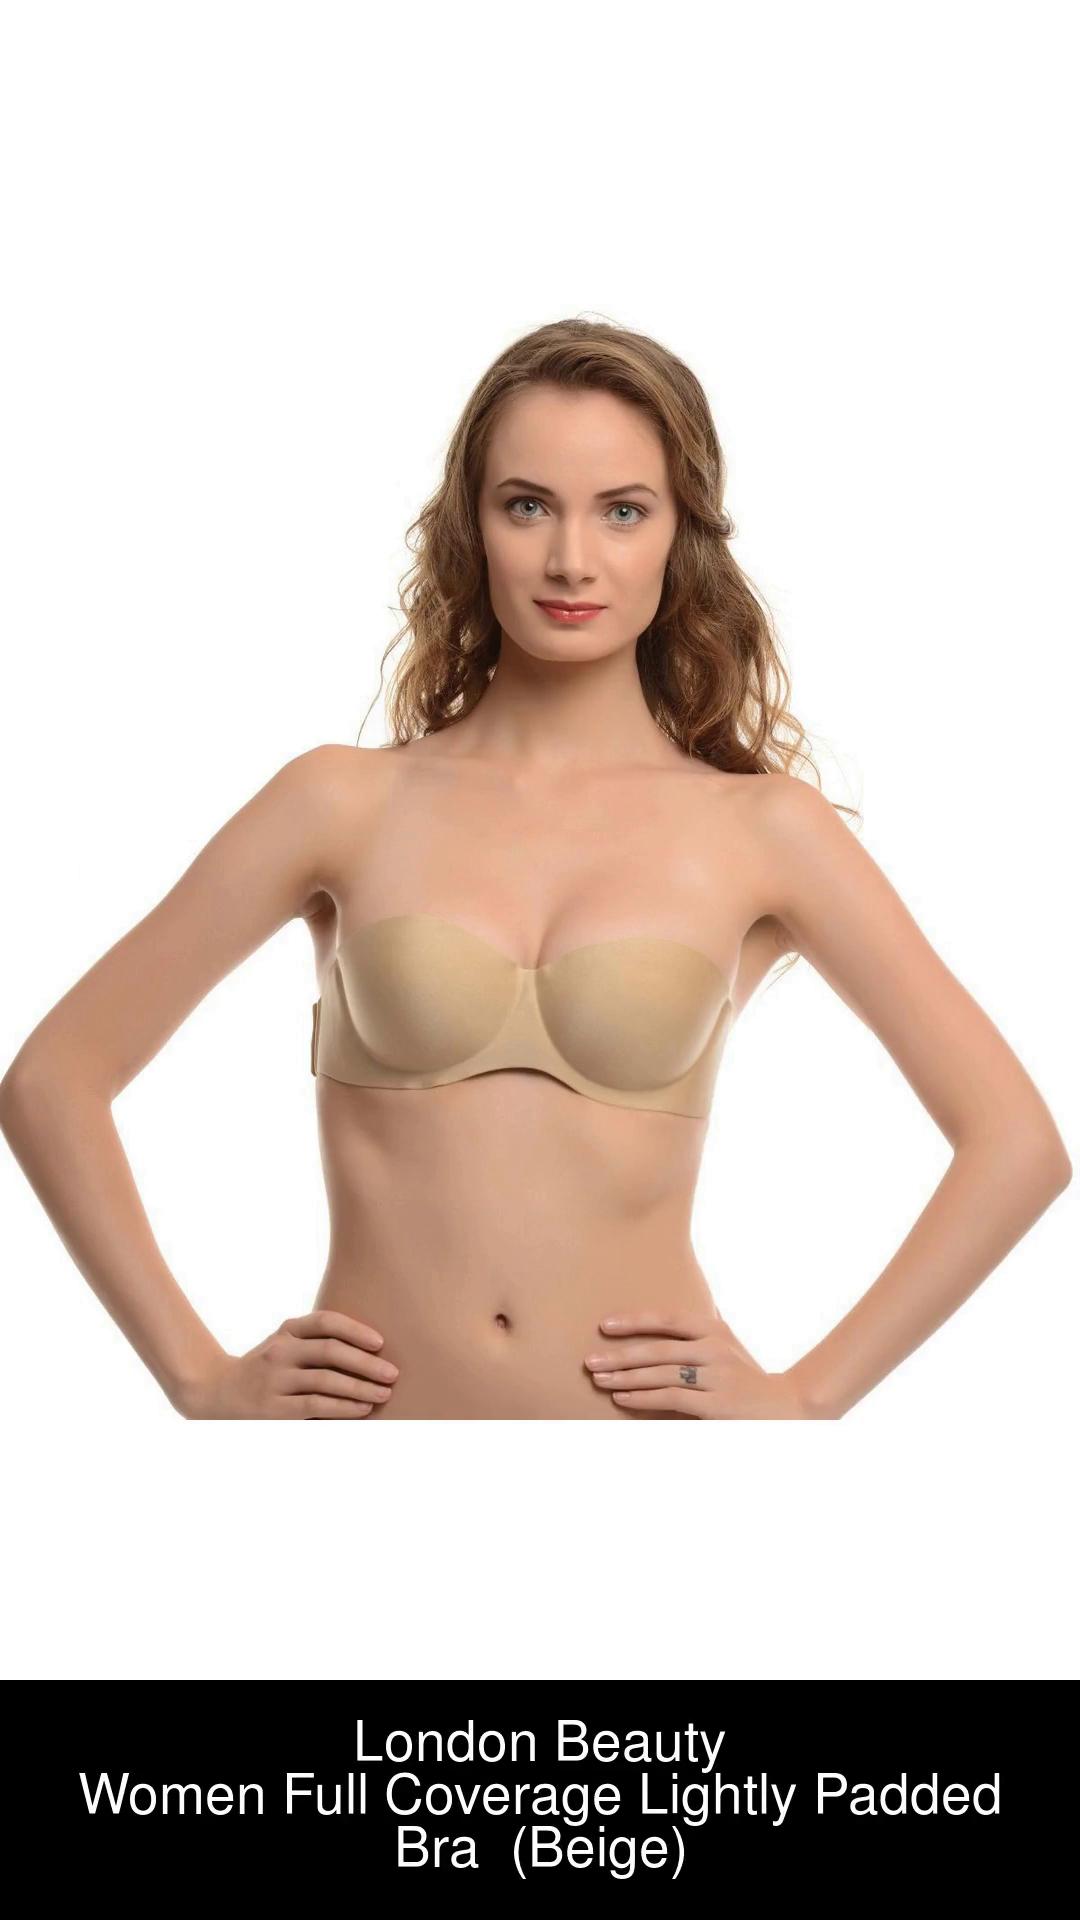 Piftif women's UNDERWIRE PADDING SUPPORT : Lightly padded strapless bra  with underwire for natural shaping and great